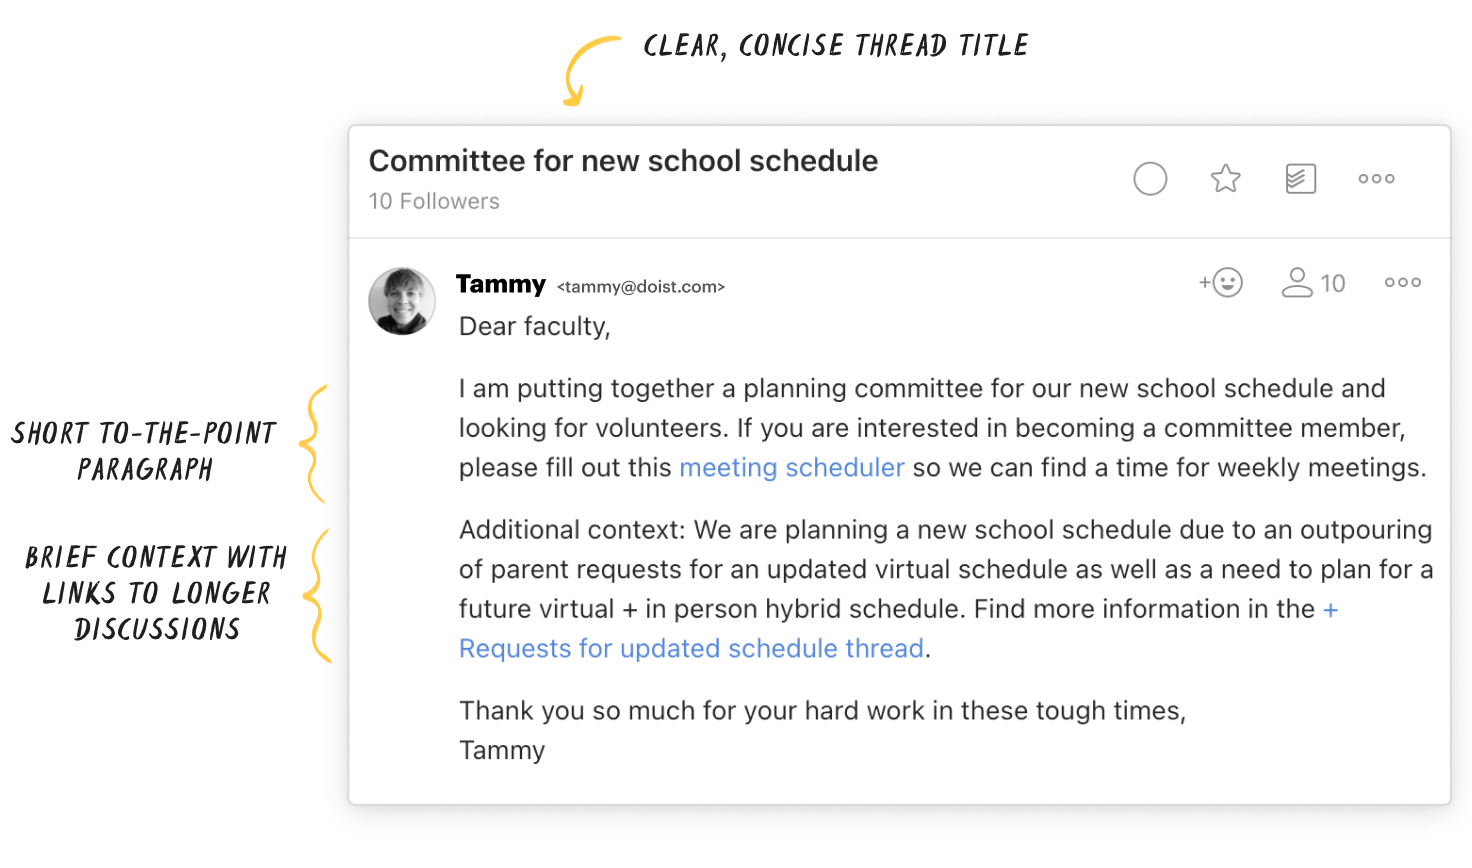 This clearly formatted and concise example message scheduling the same meeting has 3 annotations: Clear, concise thread title. Short to-the-point paragraph. Brief context with links to longer discussions. End description.